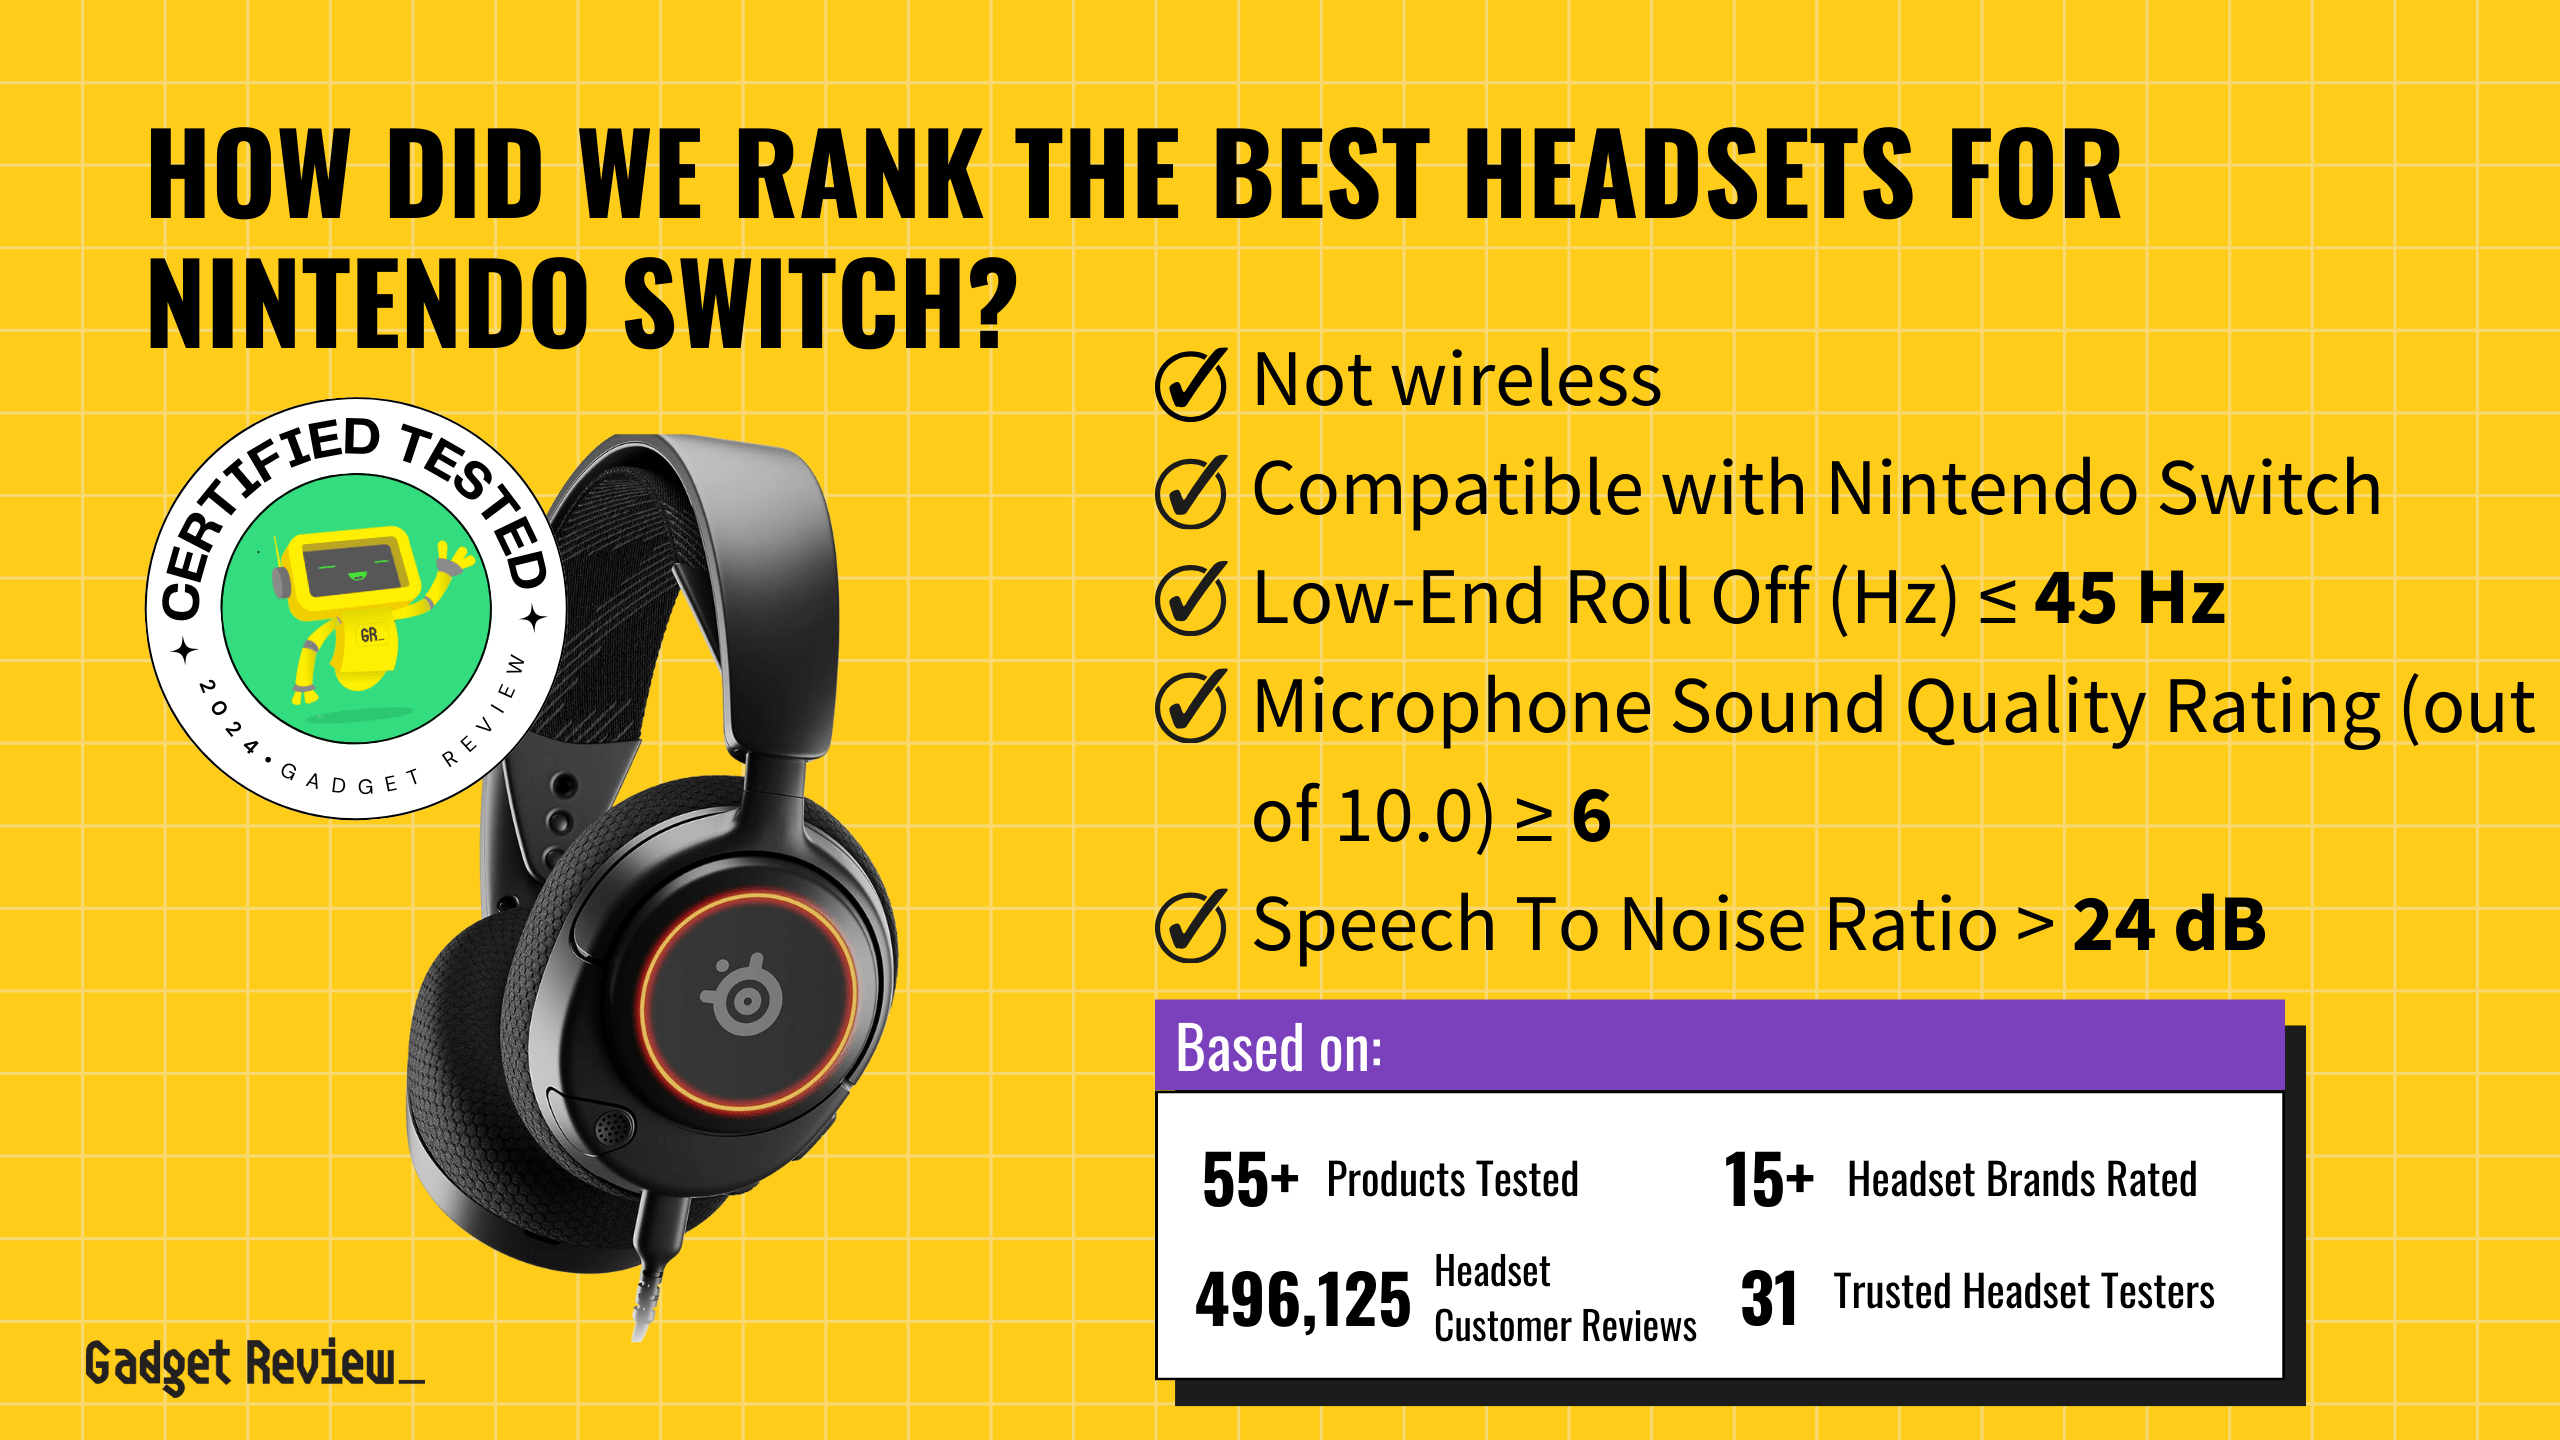 best headset for nintendo switch guide that shows the top best gaming headset model